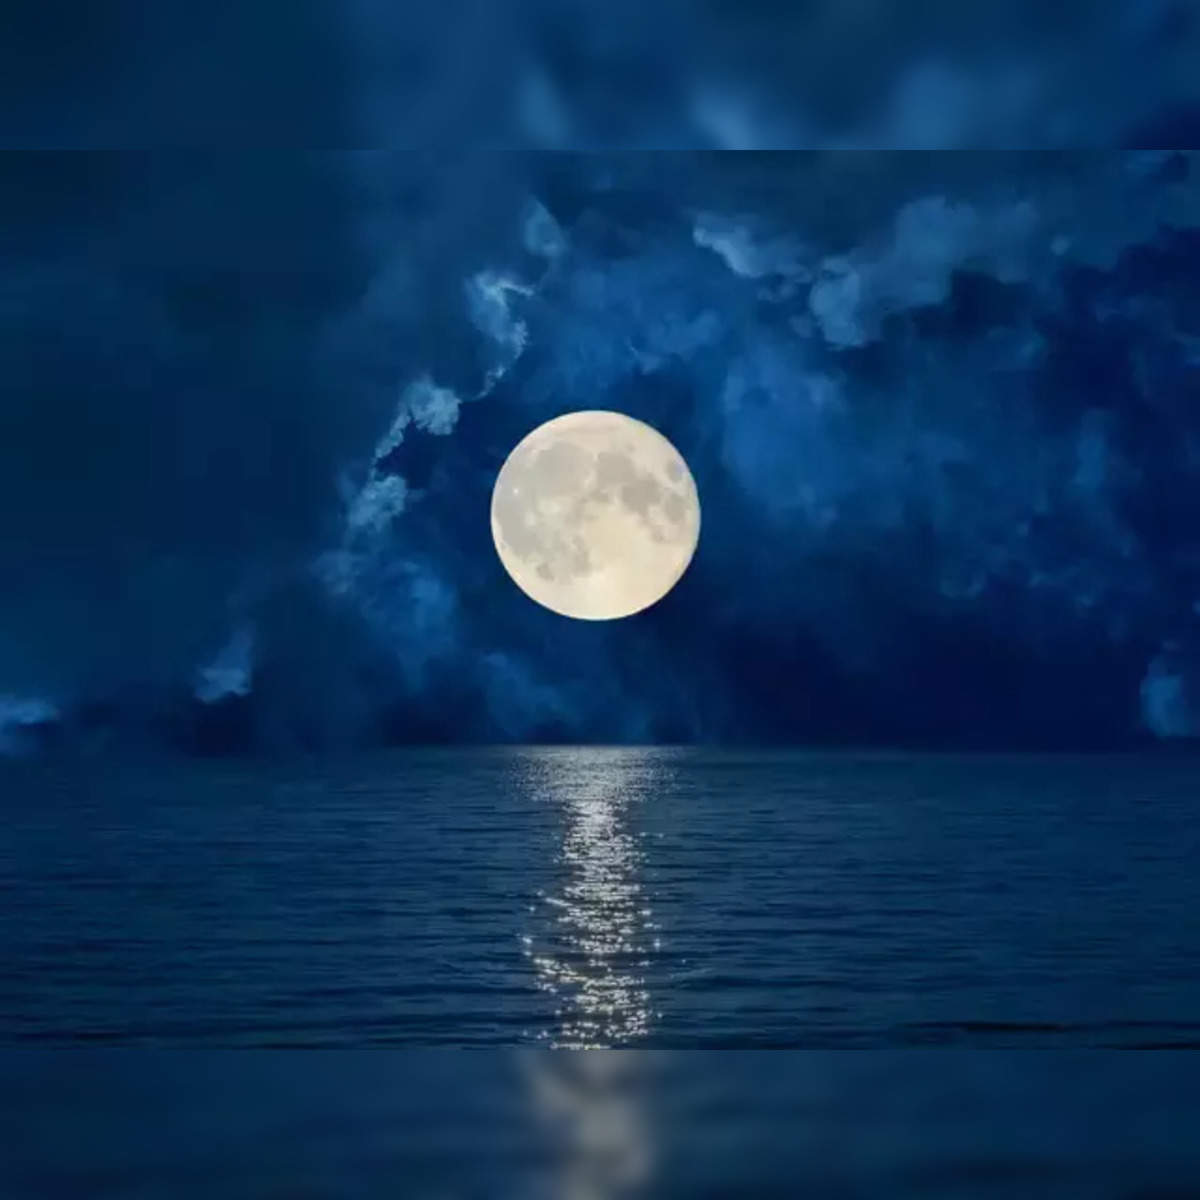 Blue moon this weekend: What makes this one different